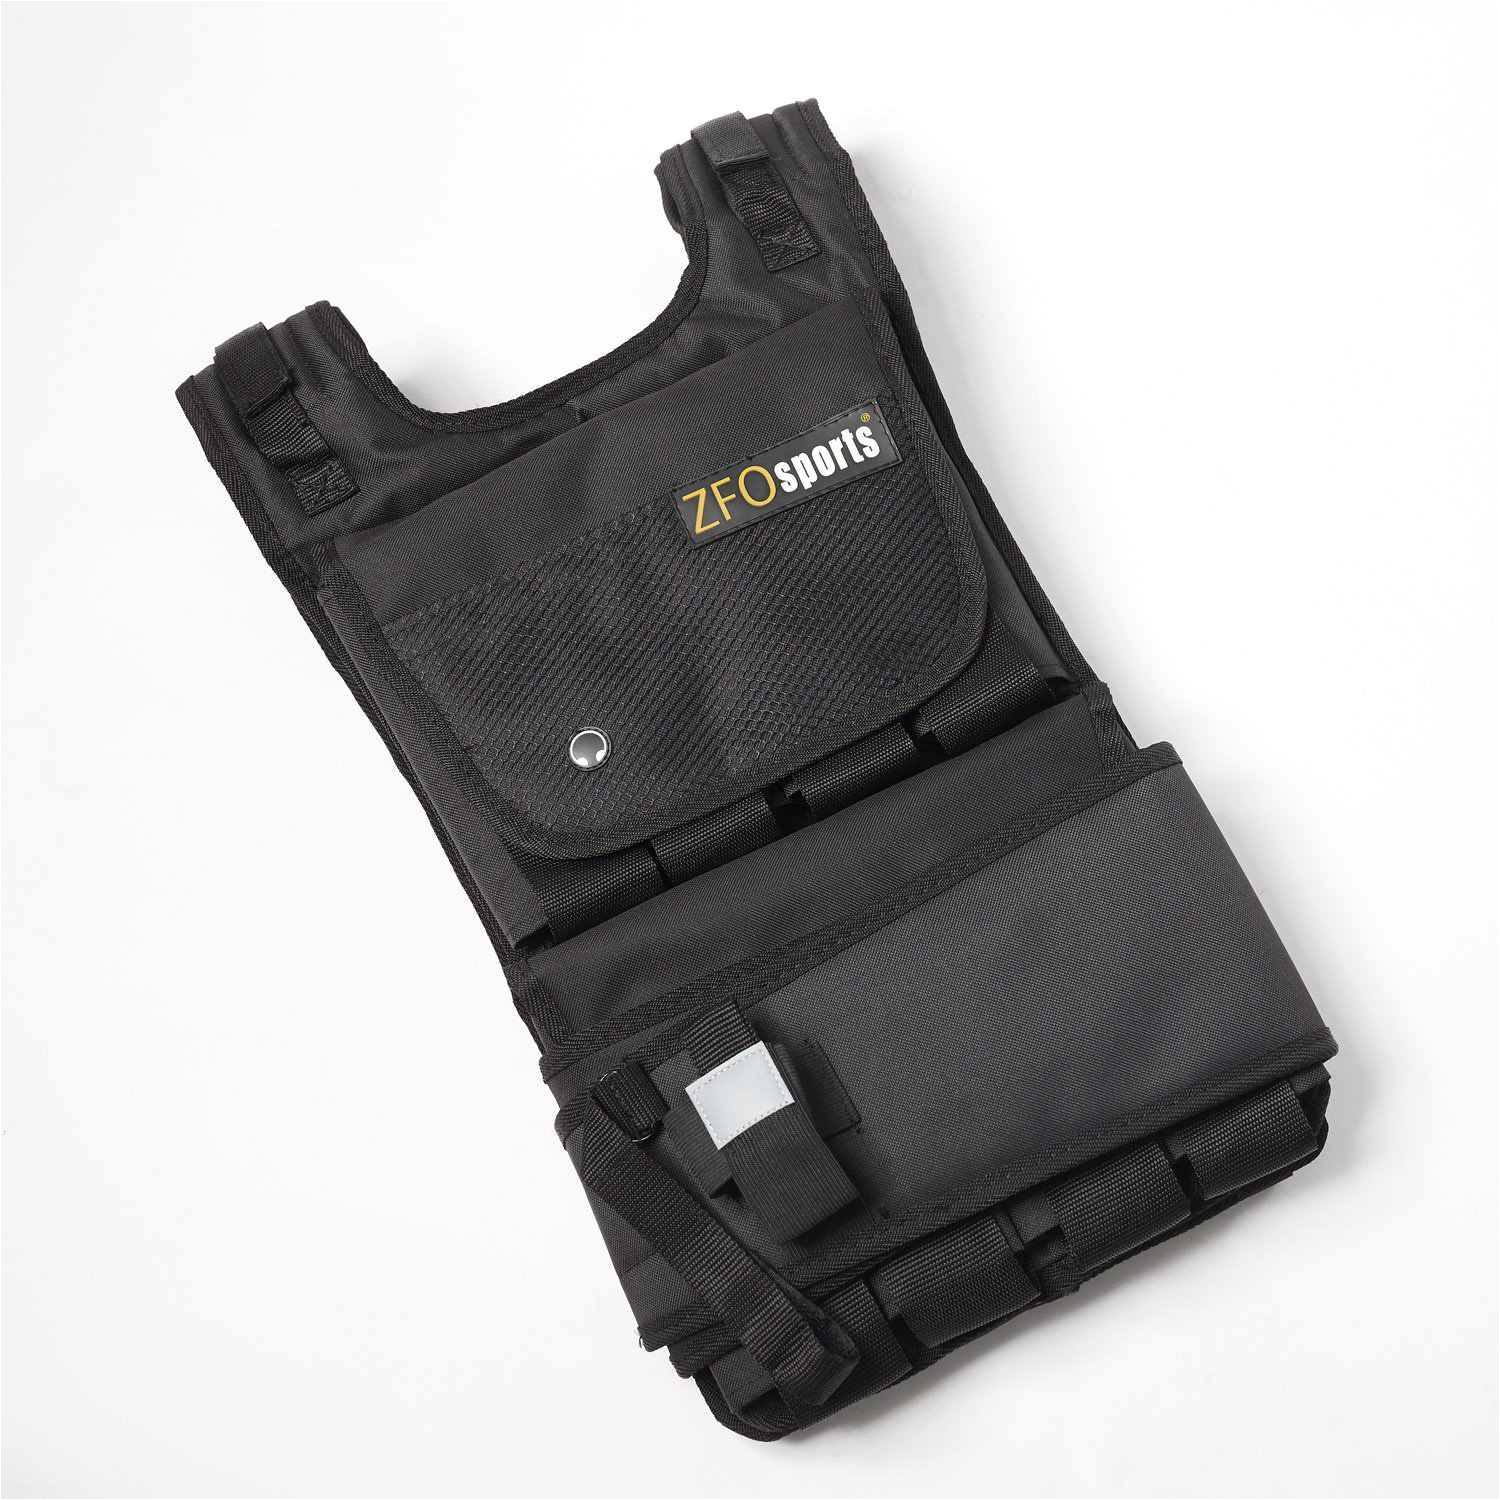 weighted vest product photo